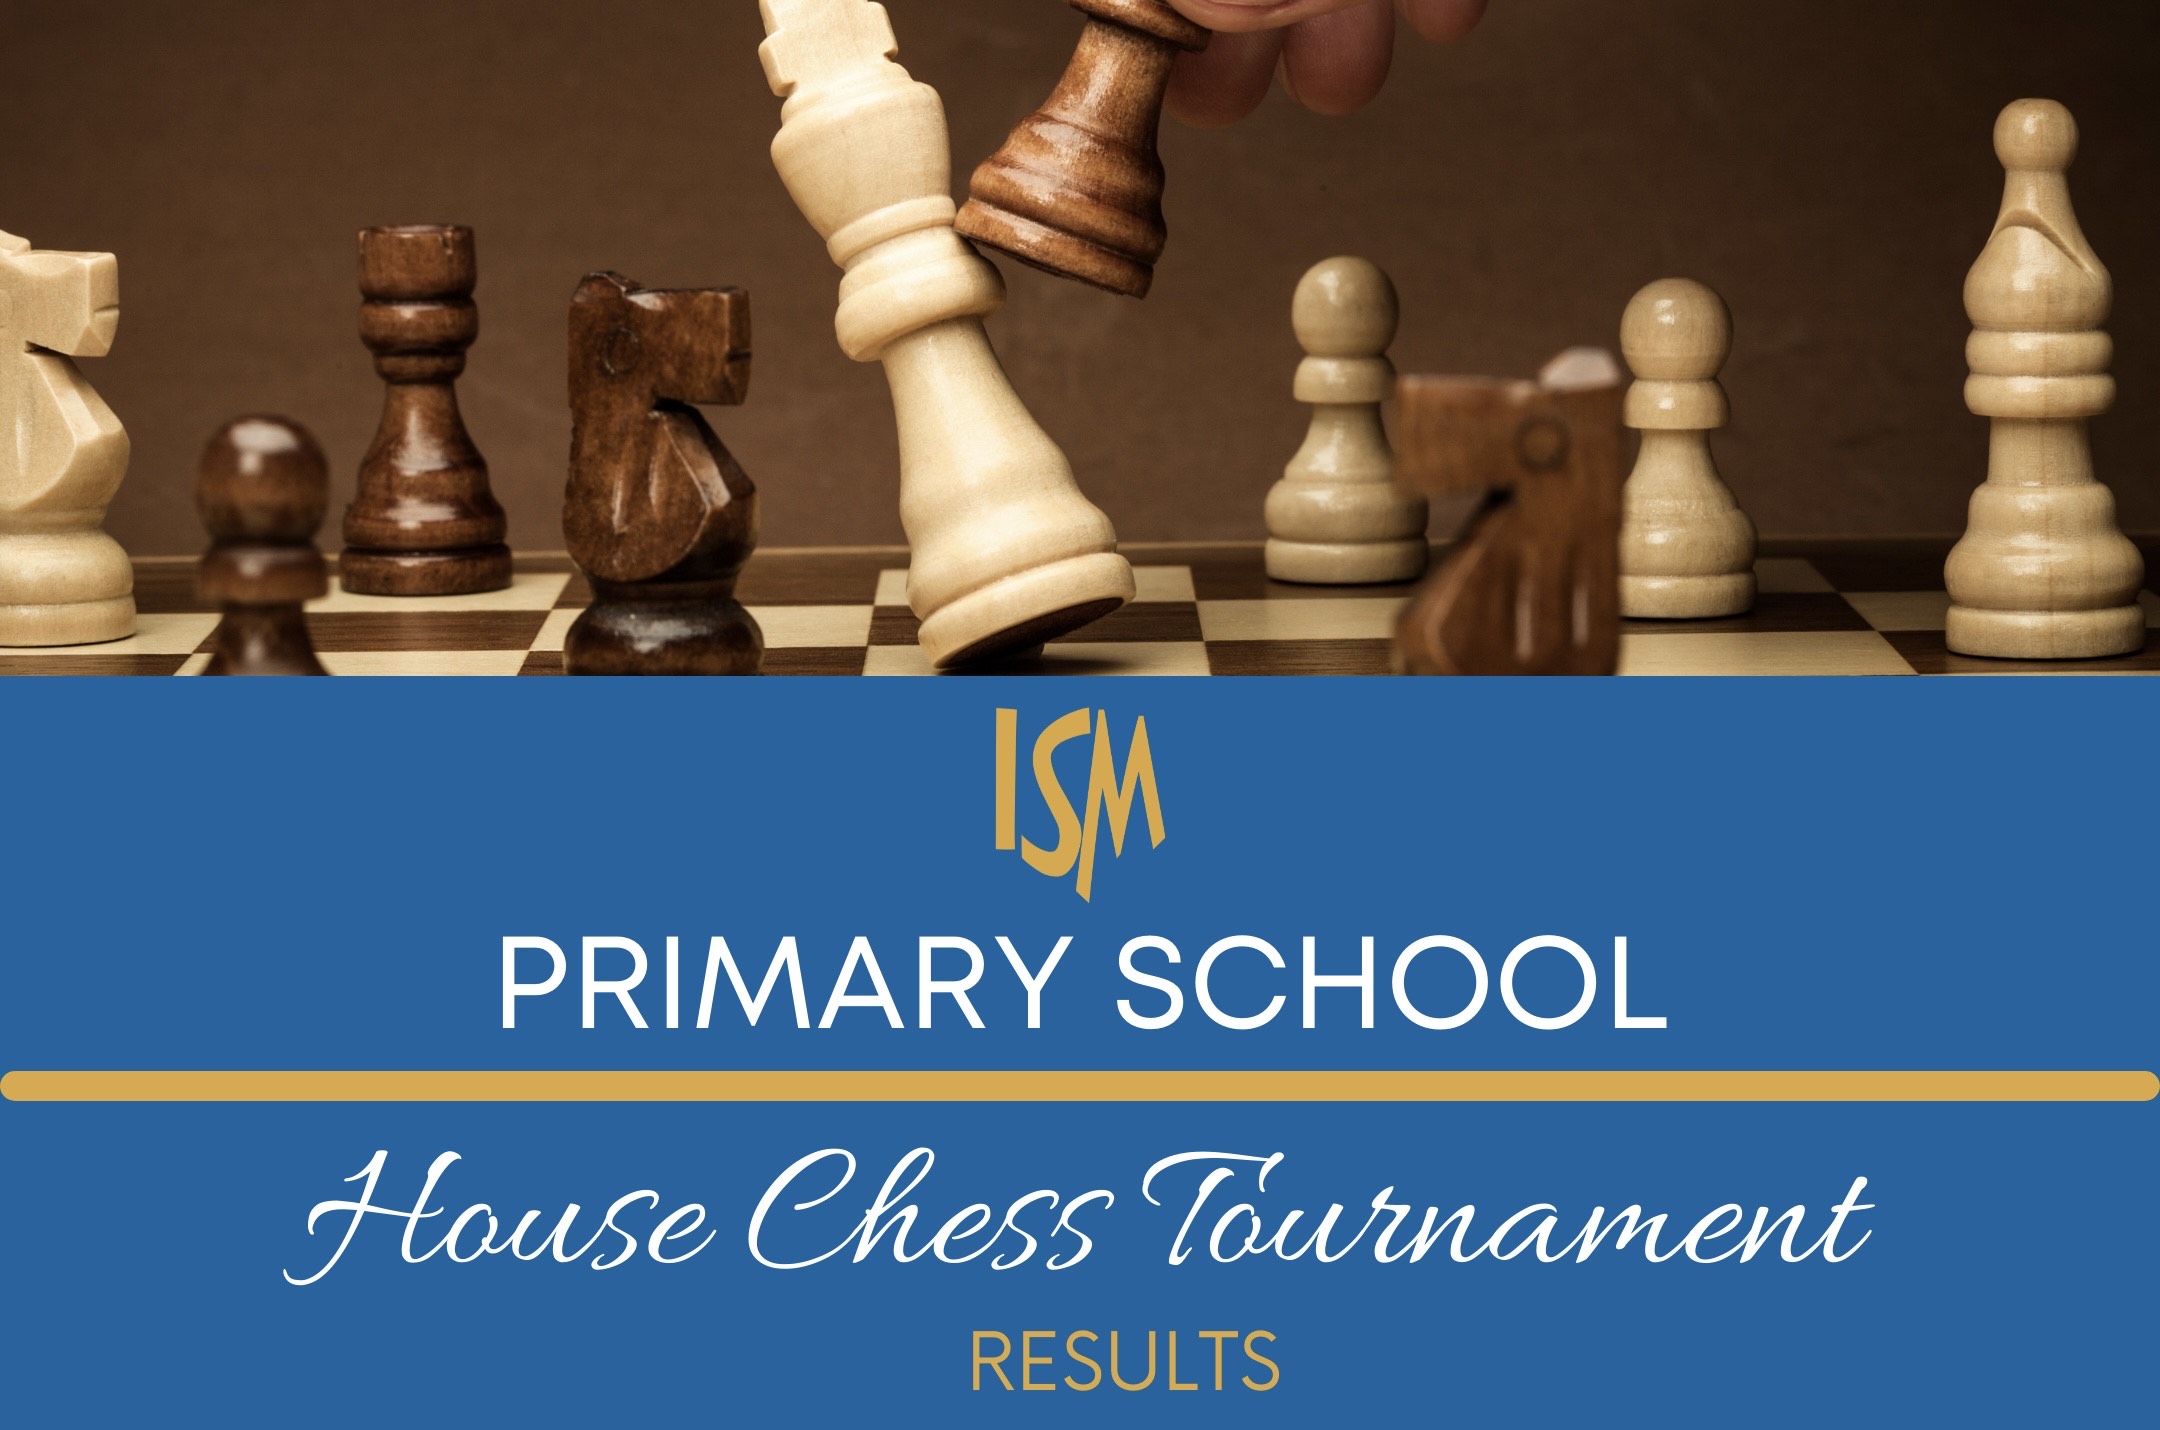 Earhart claims victory in Primary School House Chess Tournament Image